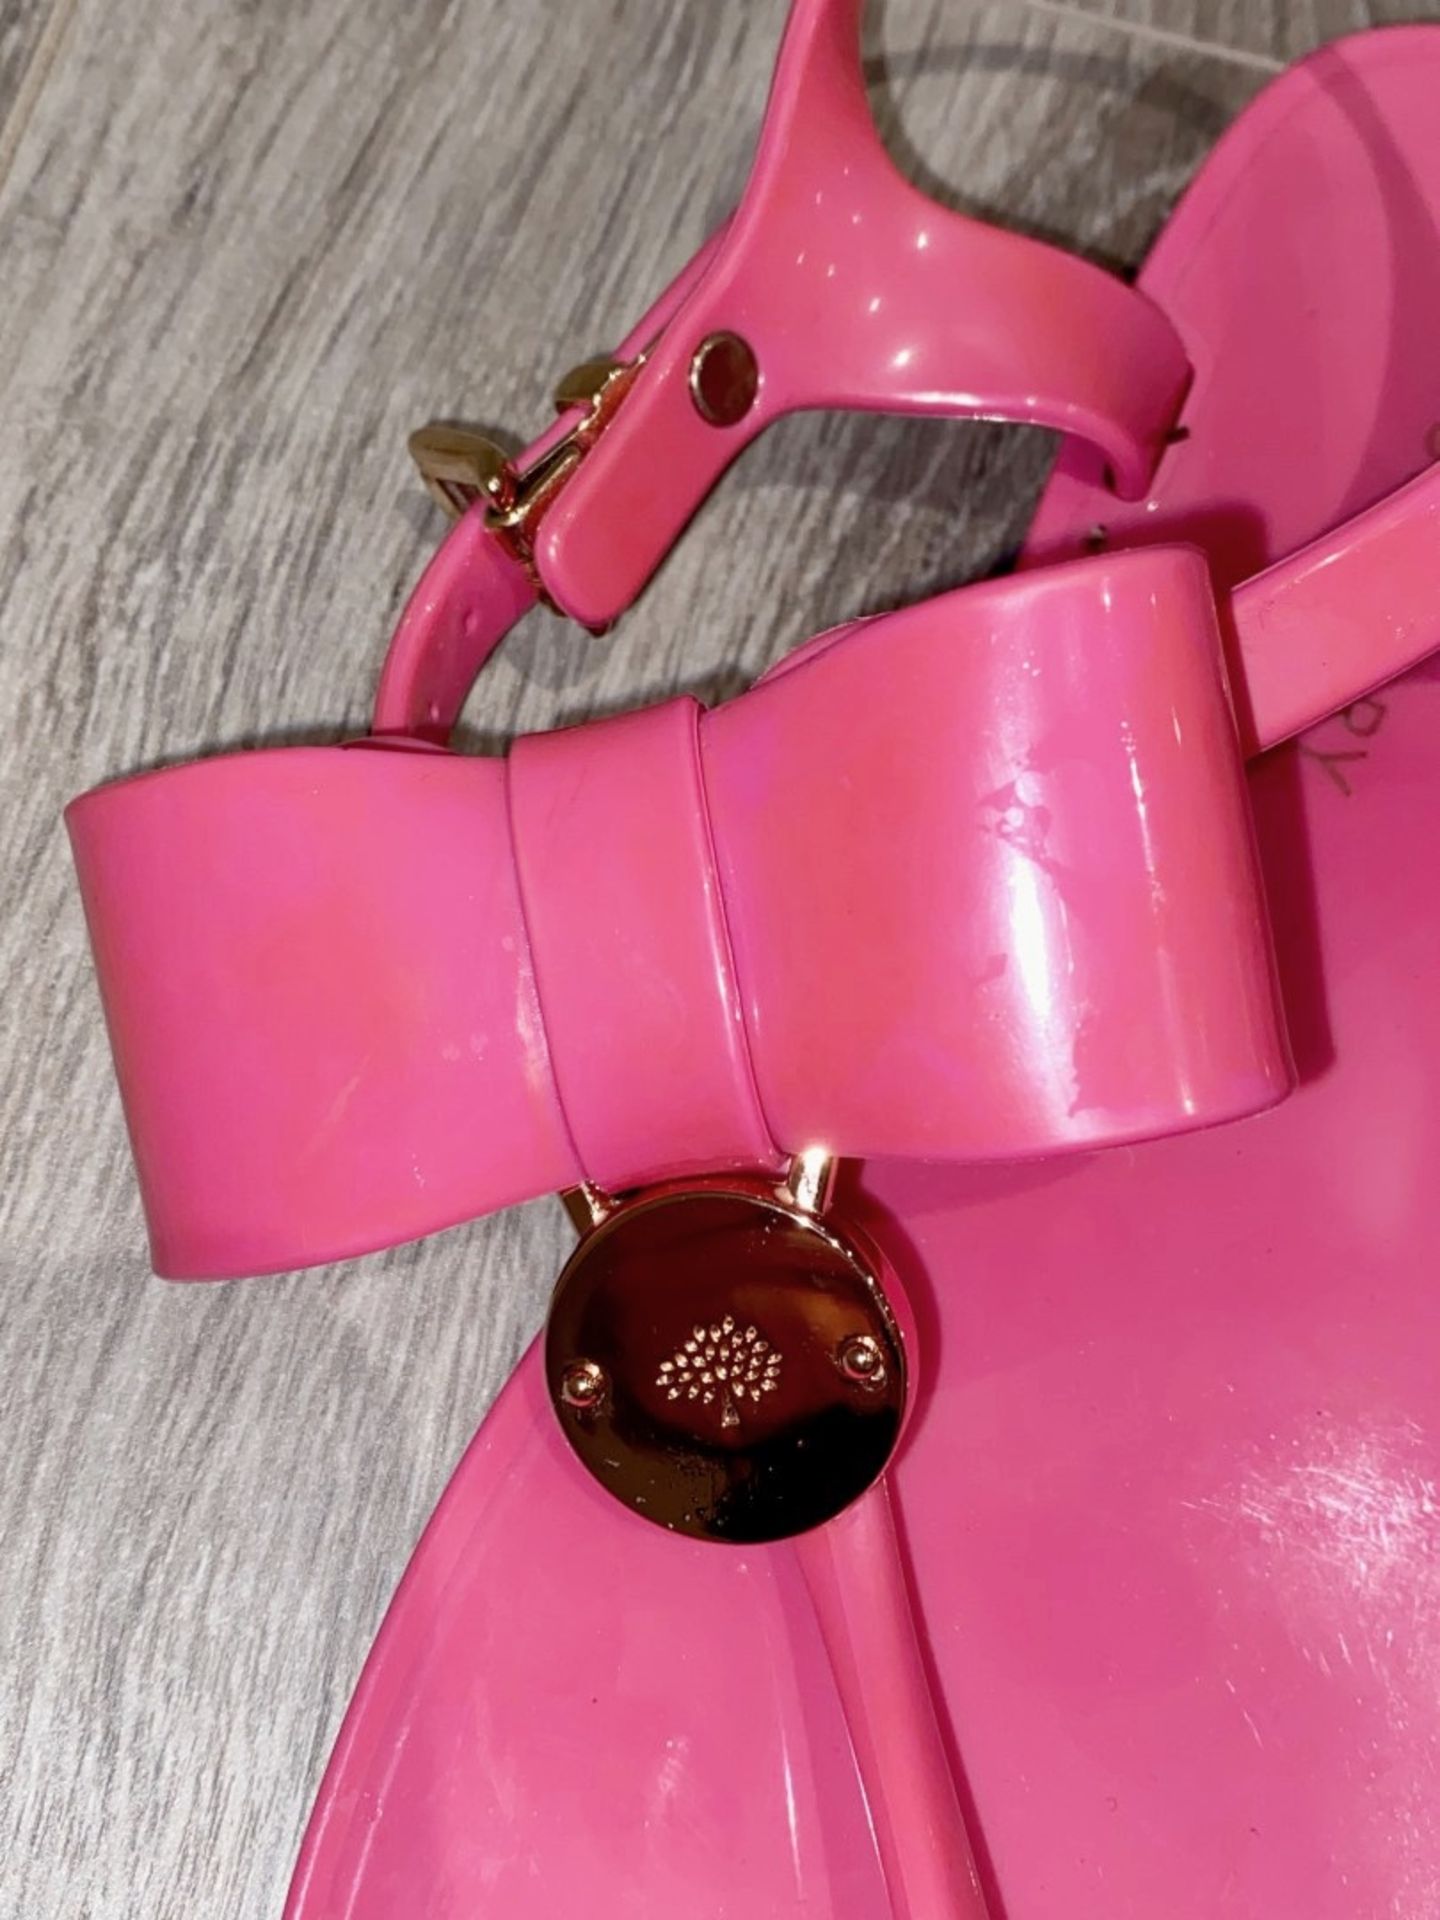 1 x Pair Of Genuine Mulberry Sandals In Pink - Size: 36 - Preowned in Worn Condition - Ref: LOT39 - - Image 3 of 3